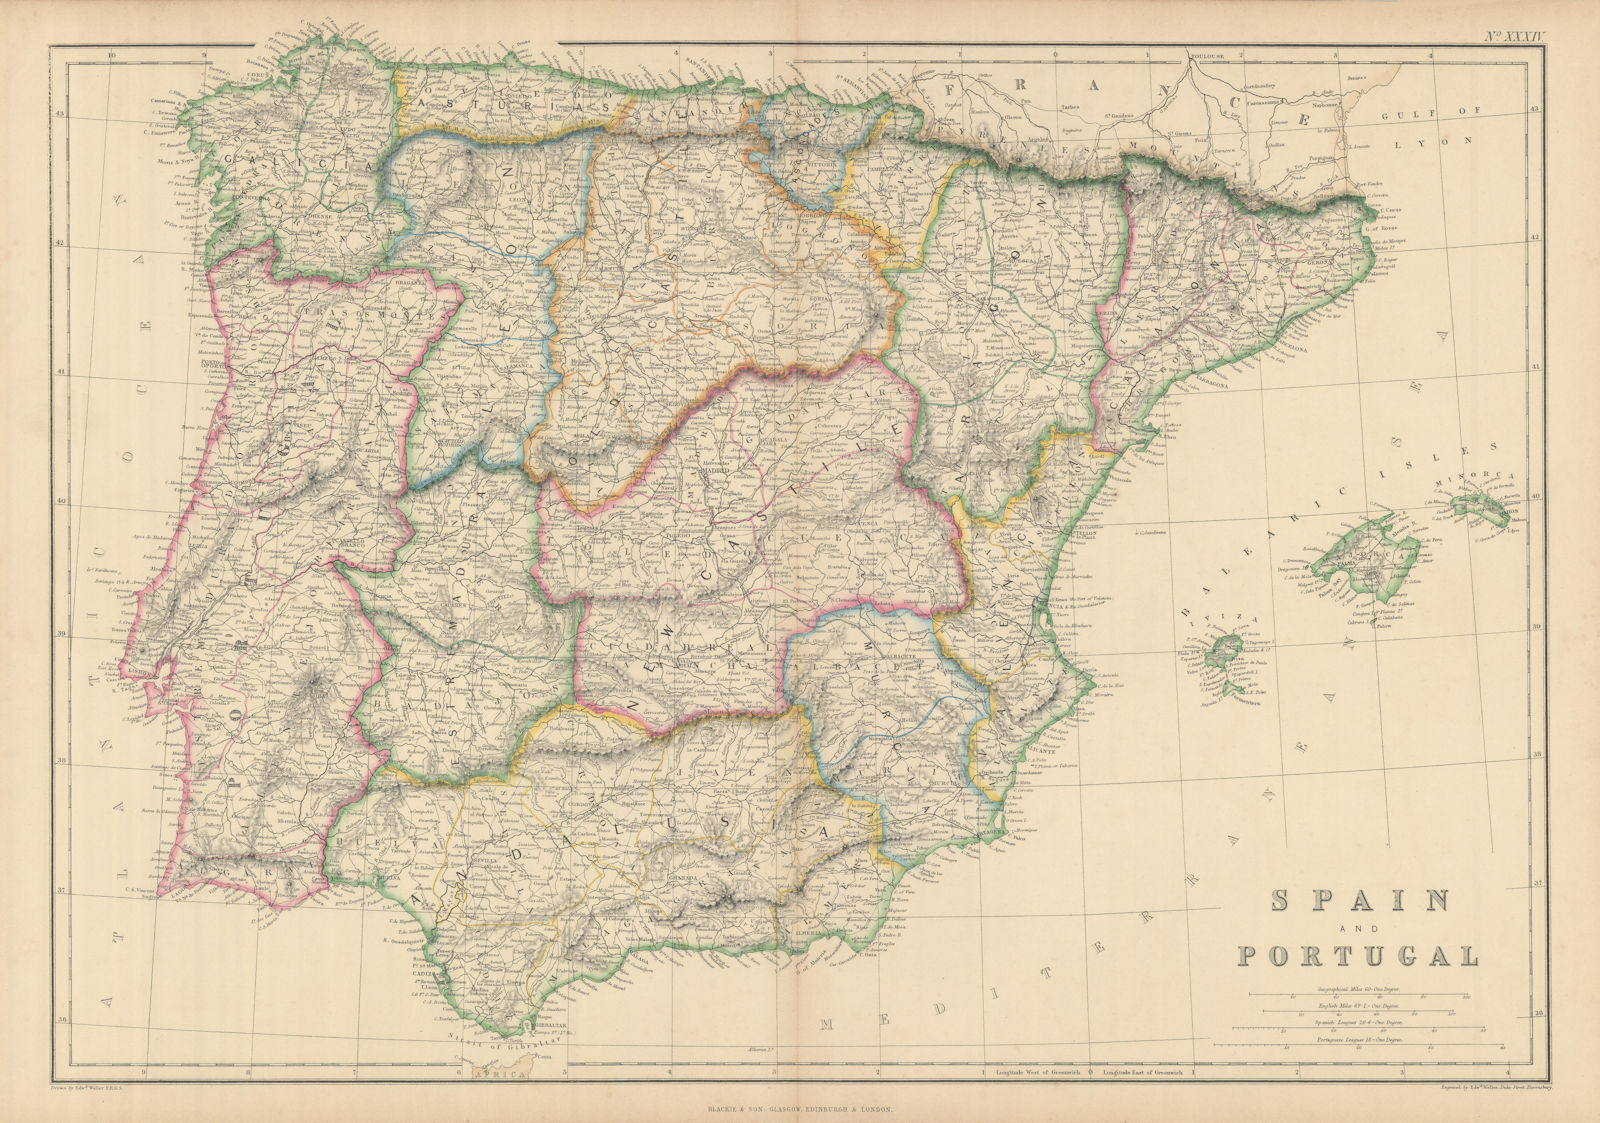 Spain and Portugal by Edward Weller. Iberia 1860 old antique map plan chart